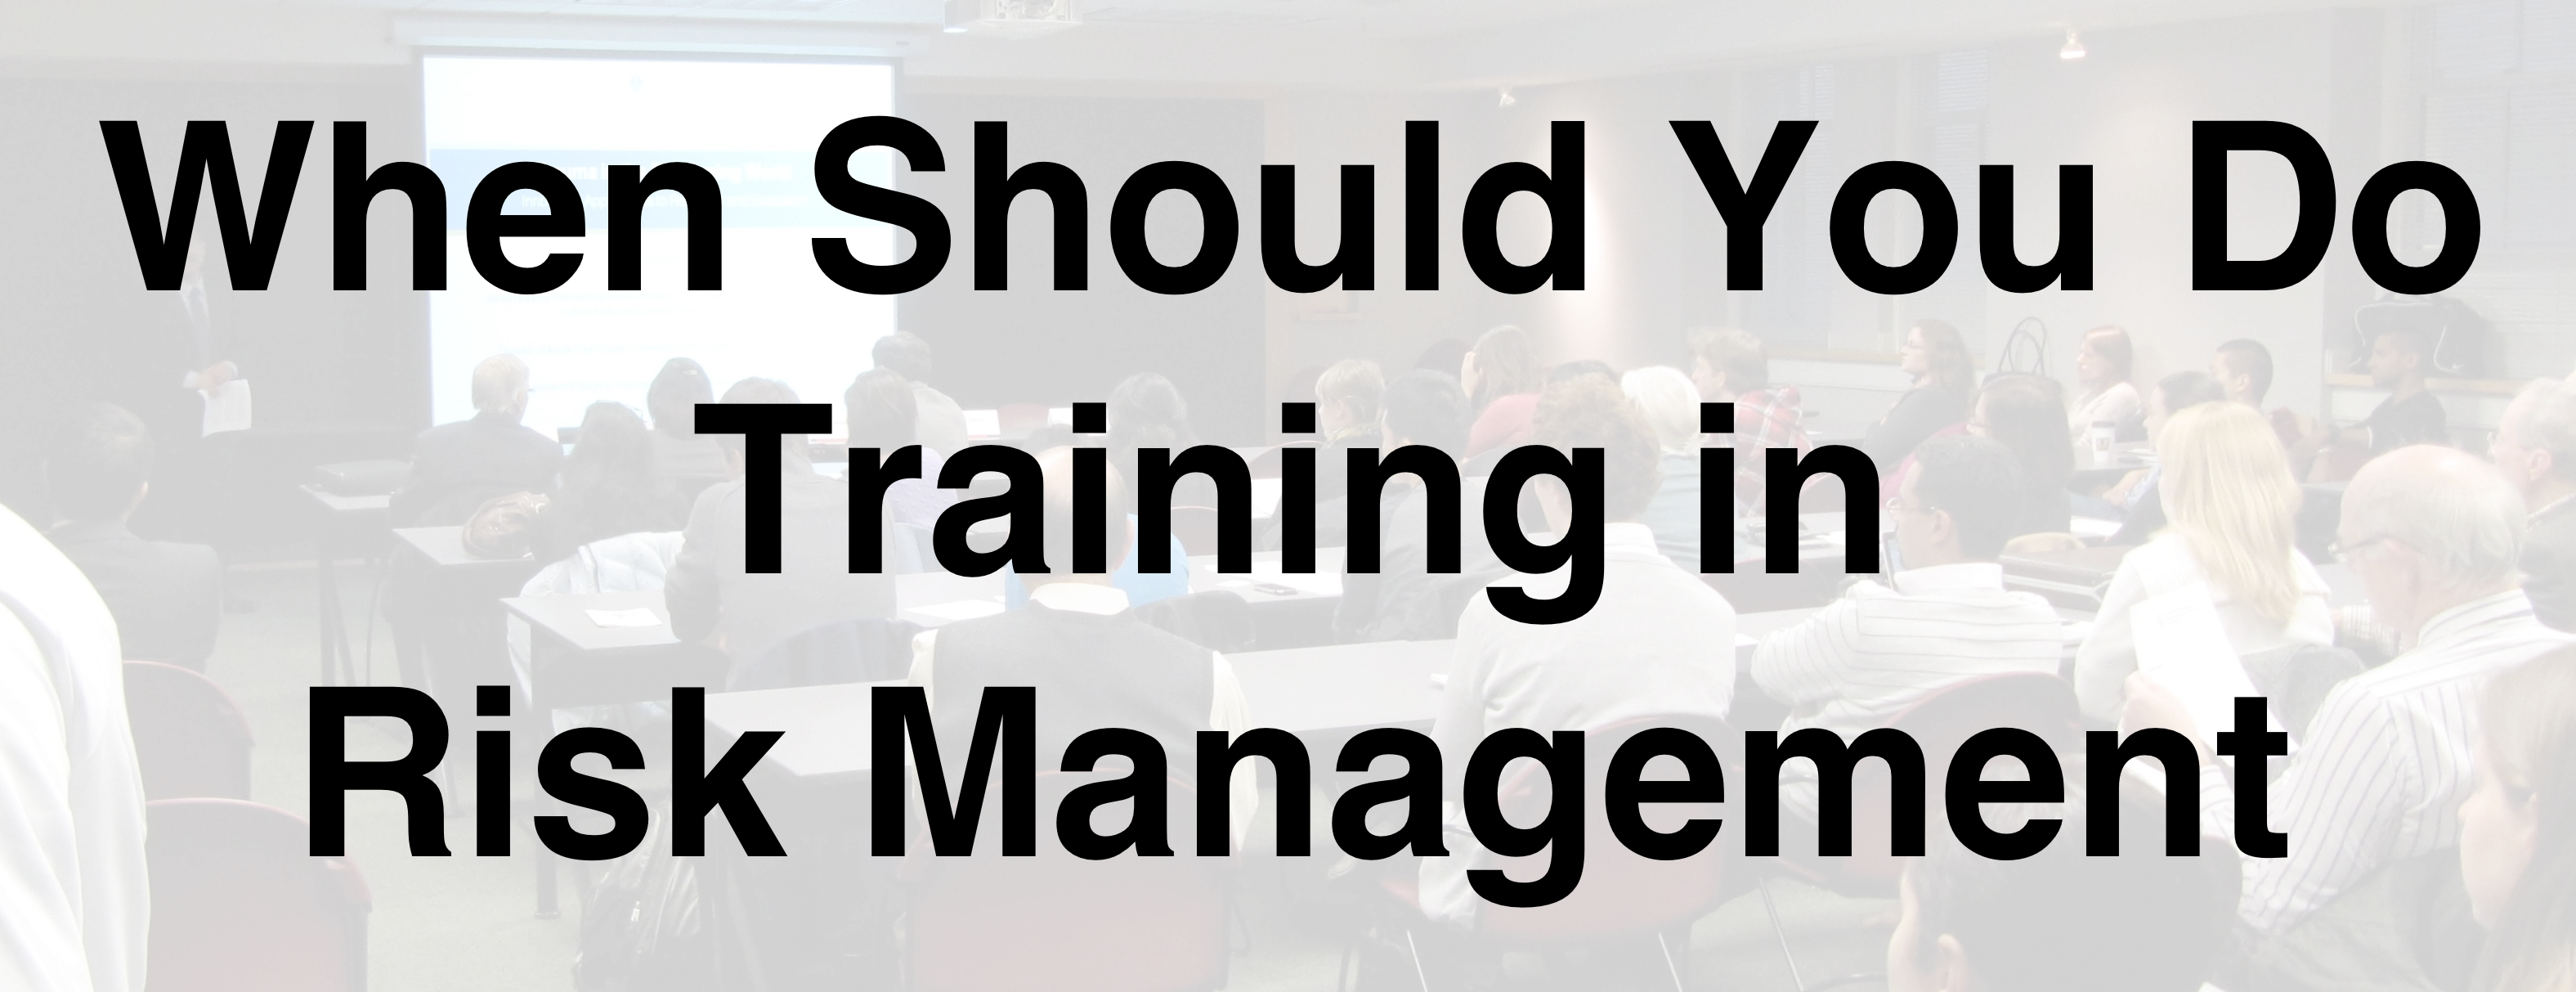 When Should You Do Training in Risk Management